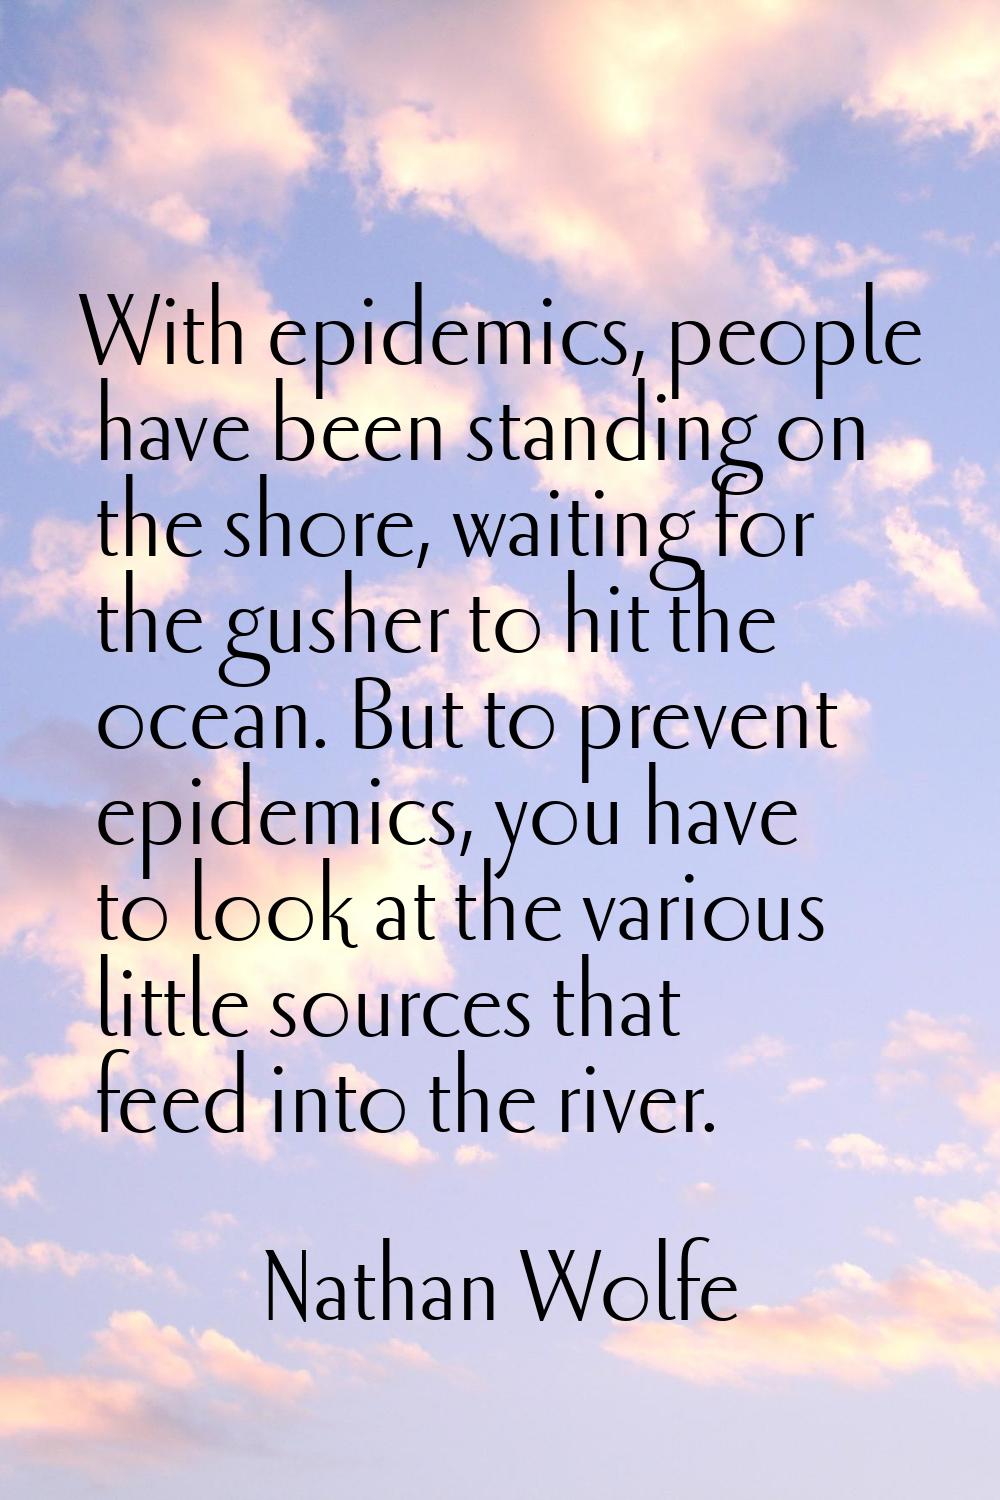 With epidemics, people have been standing on the shore, waiting for the gusher to hit the ocean. Bu